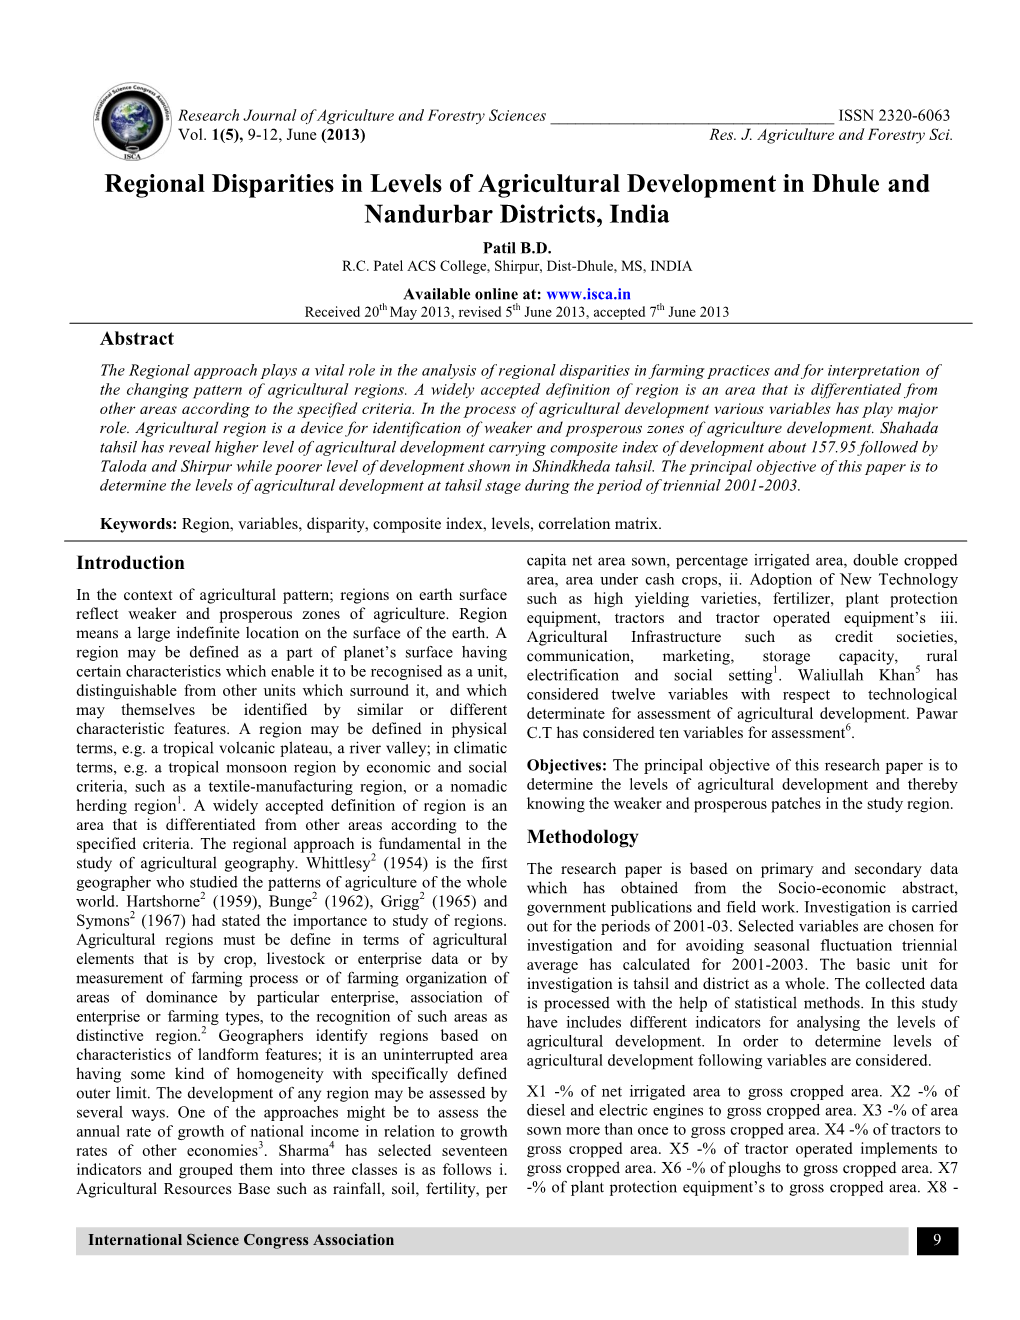 Regional Disparities in Levels of Agricultural Development in Dhule and Nandurbar Districts, India